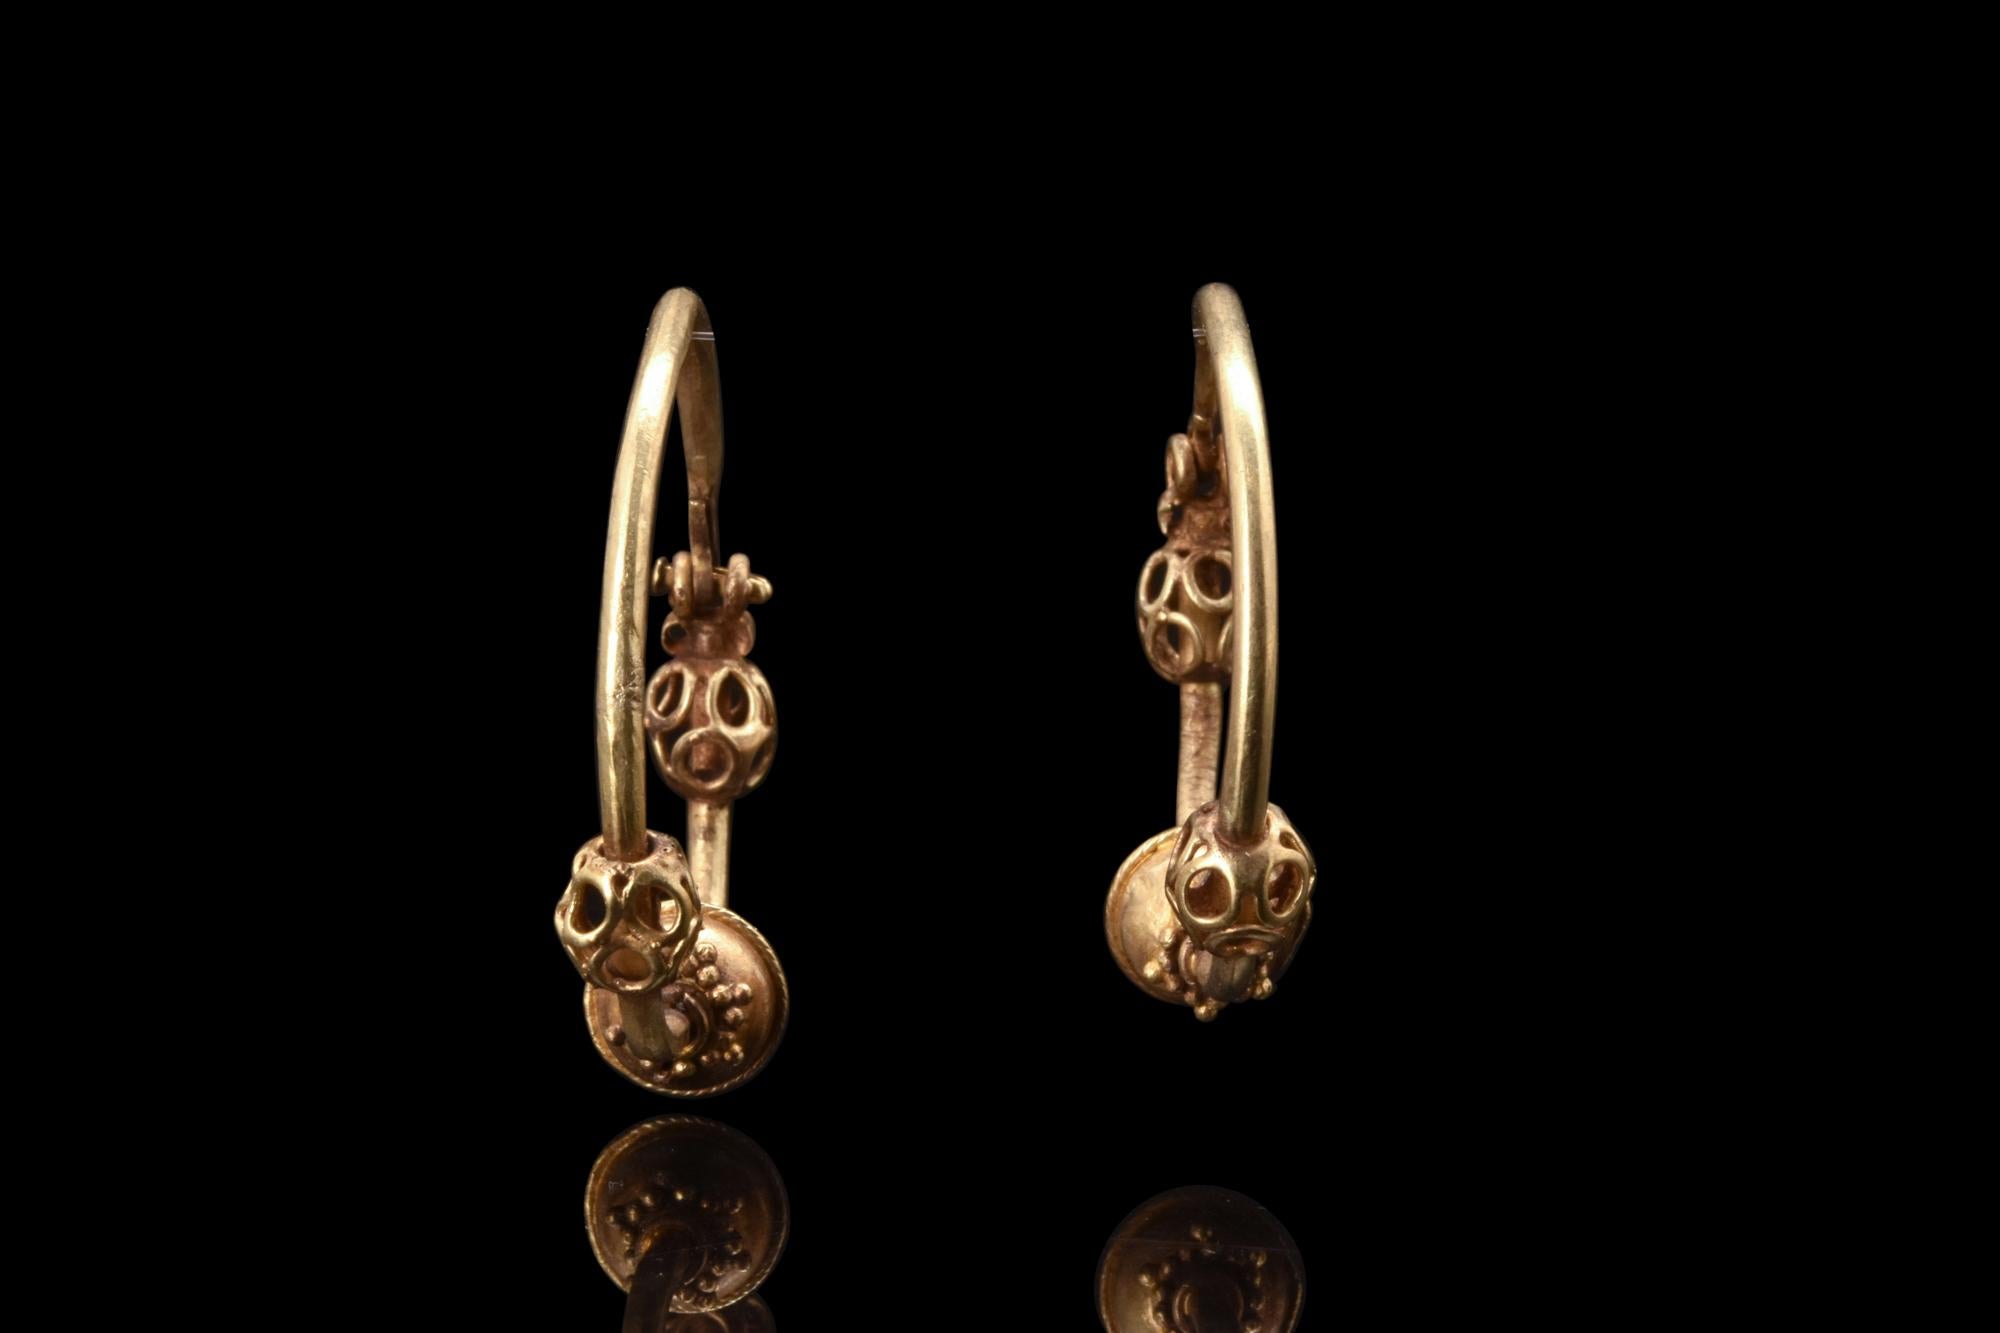 A matched pair of Byzantine gold hoop earrings with a hook and eye closure. These exquisite earrings have three spherical decorative elements suspended along each loop. At the centre, a ball with beading at its edges and at both sides, symmetrical